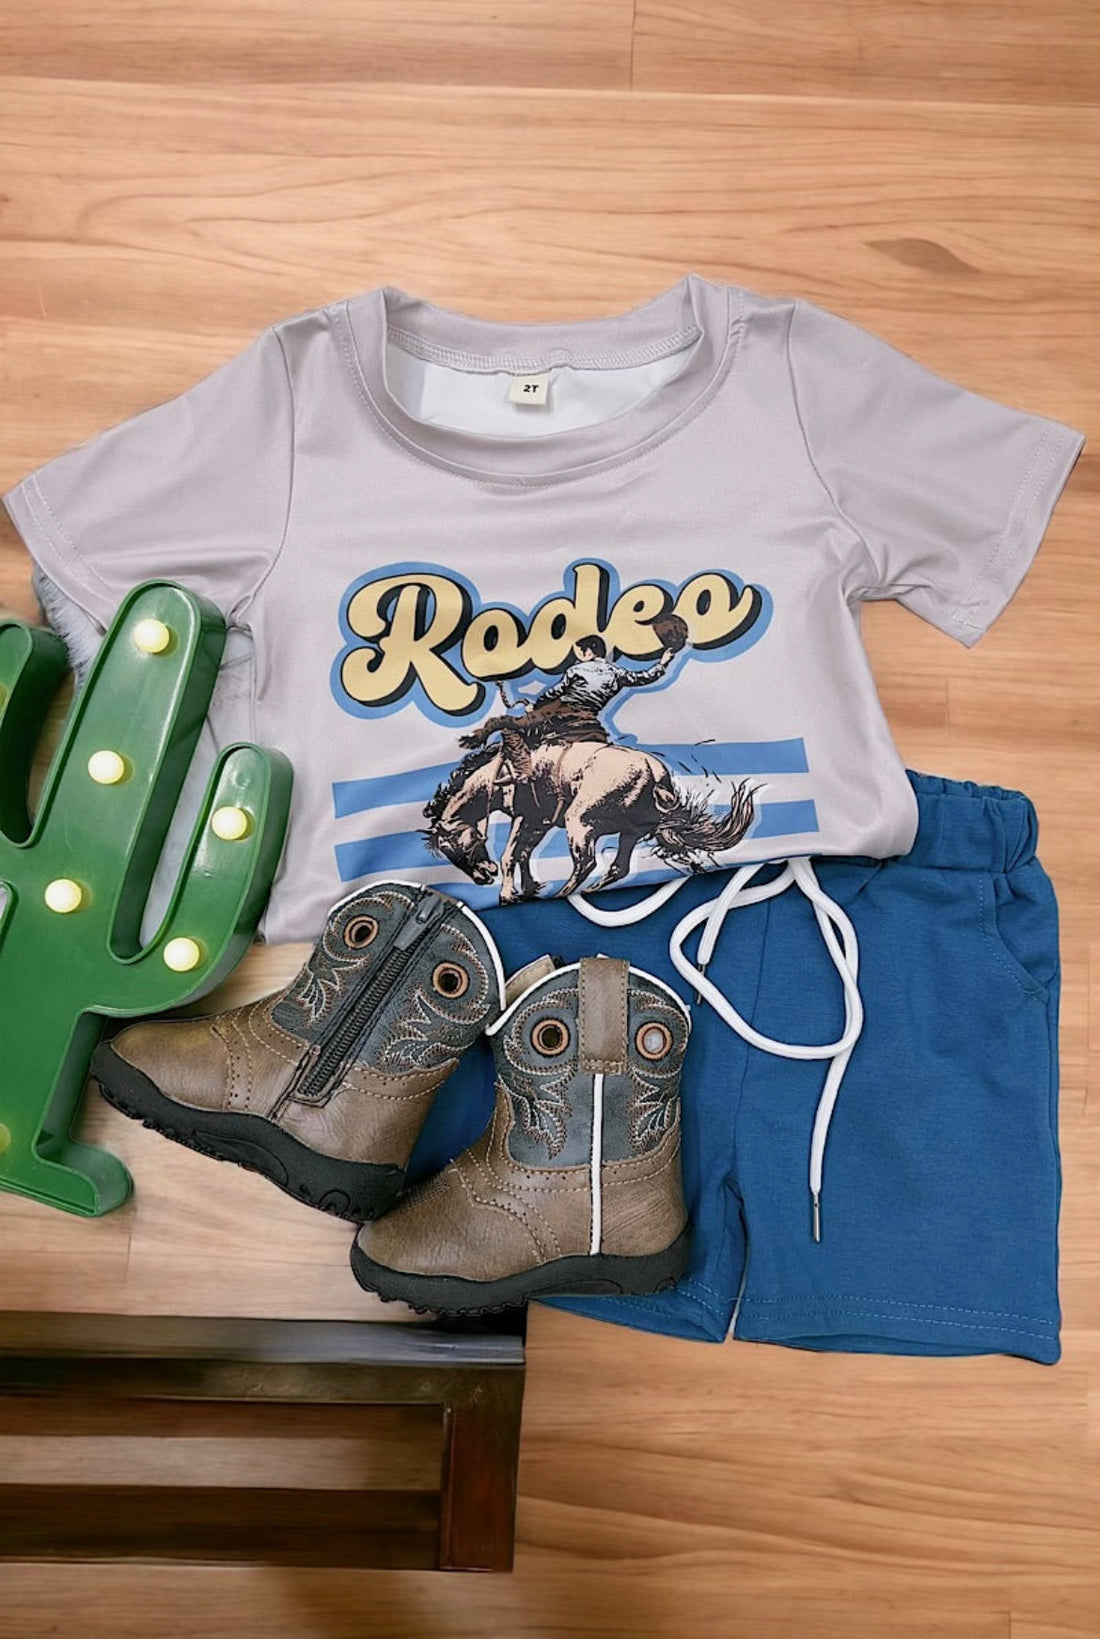 Boys Rodeo Horse Rider with Blue Short Set